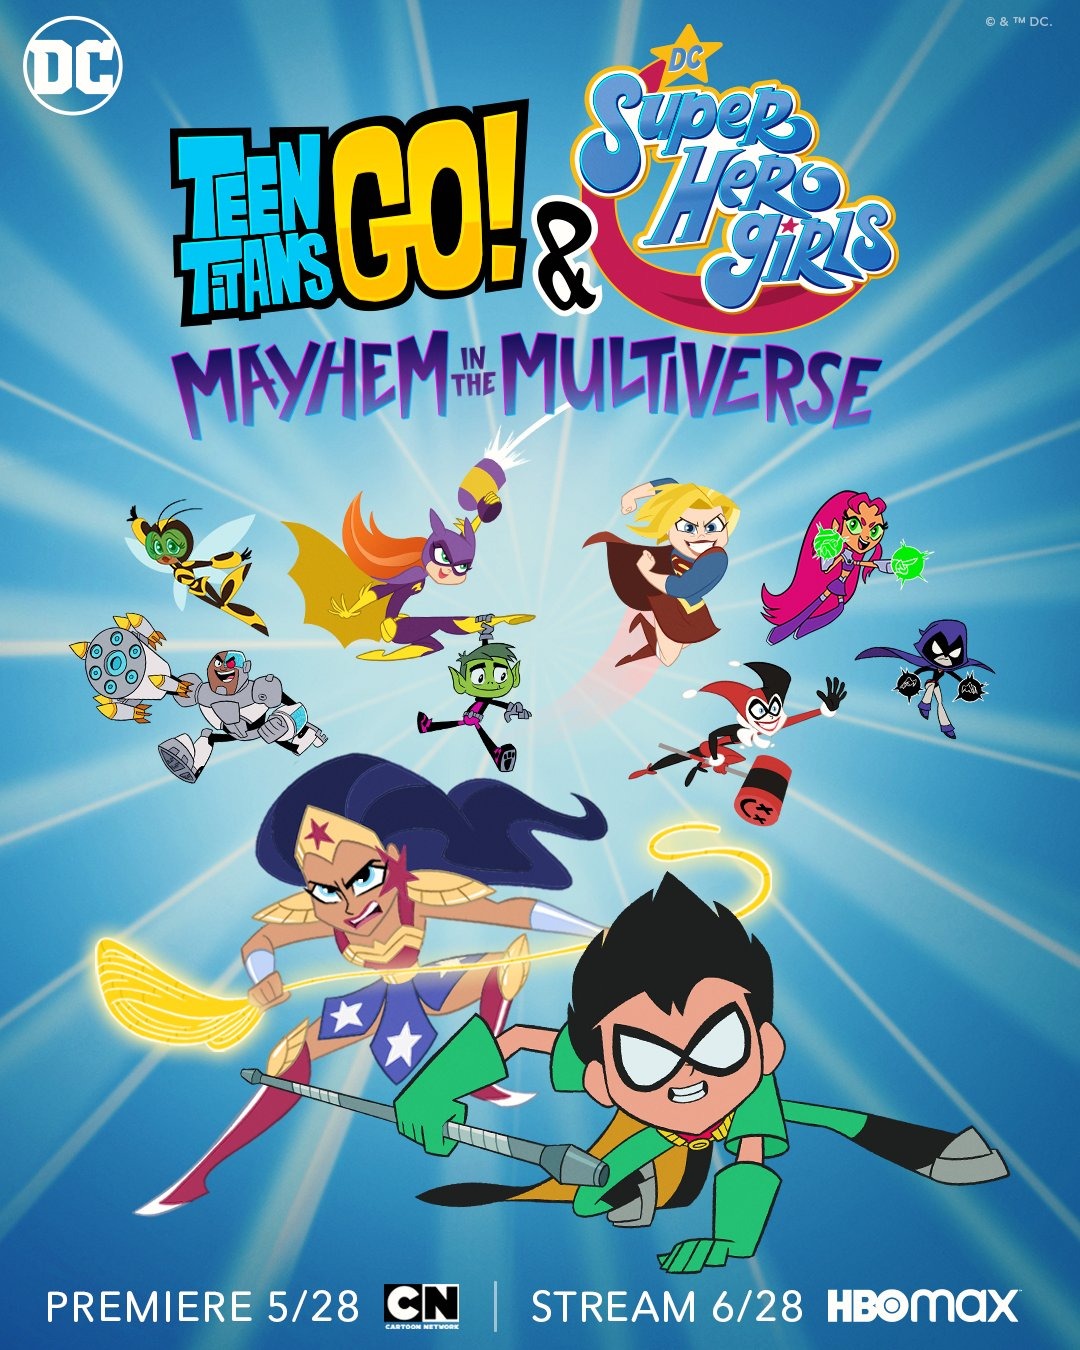 Extra Large TV Poster Image for Teen Titans Go! & DC Super Hero Girls: Mayhem in the Multiverse 